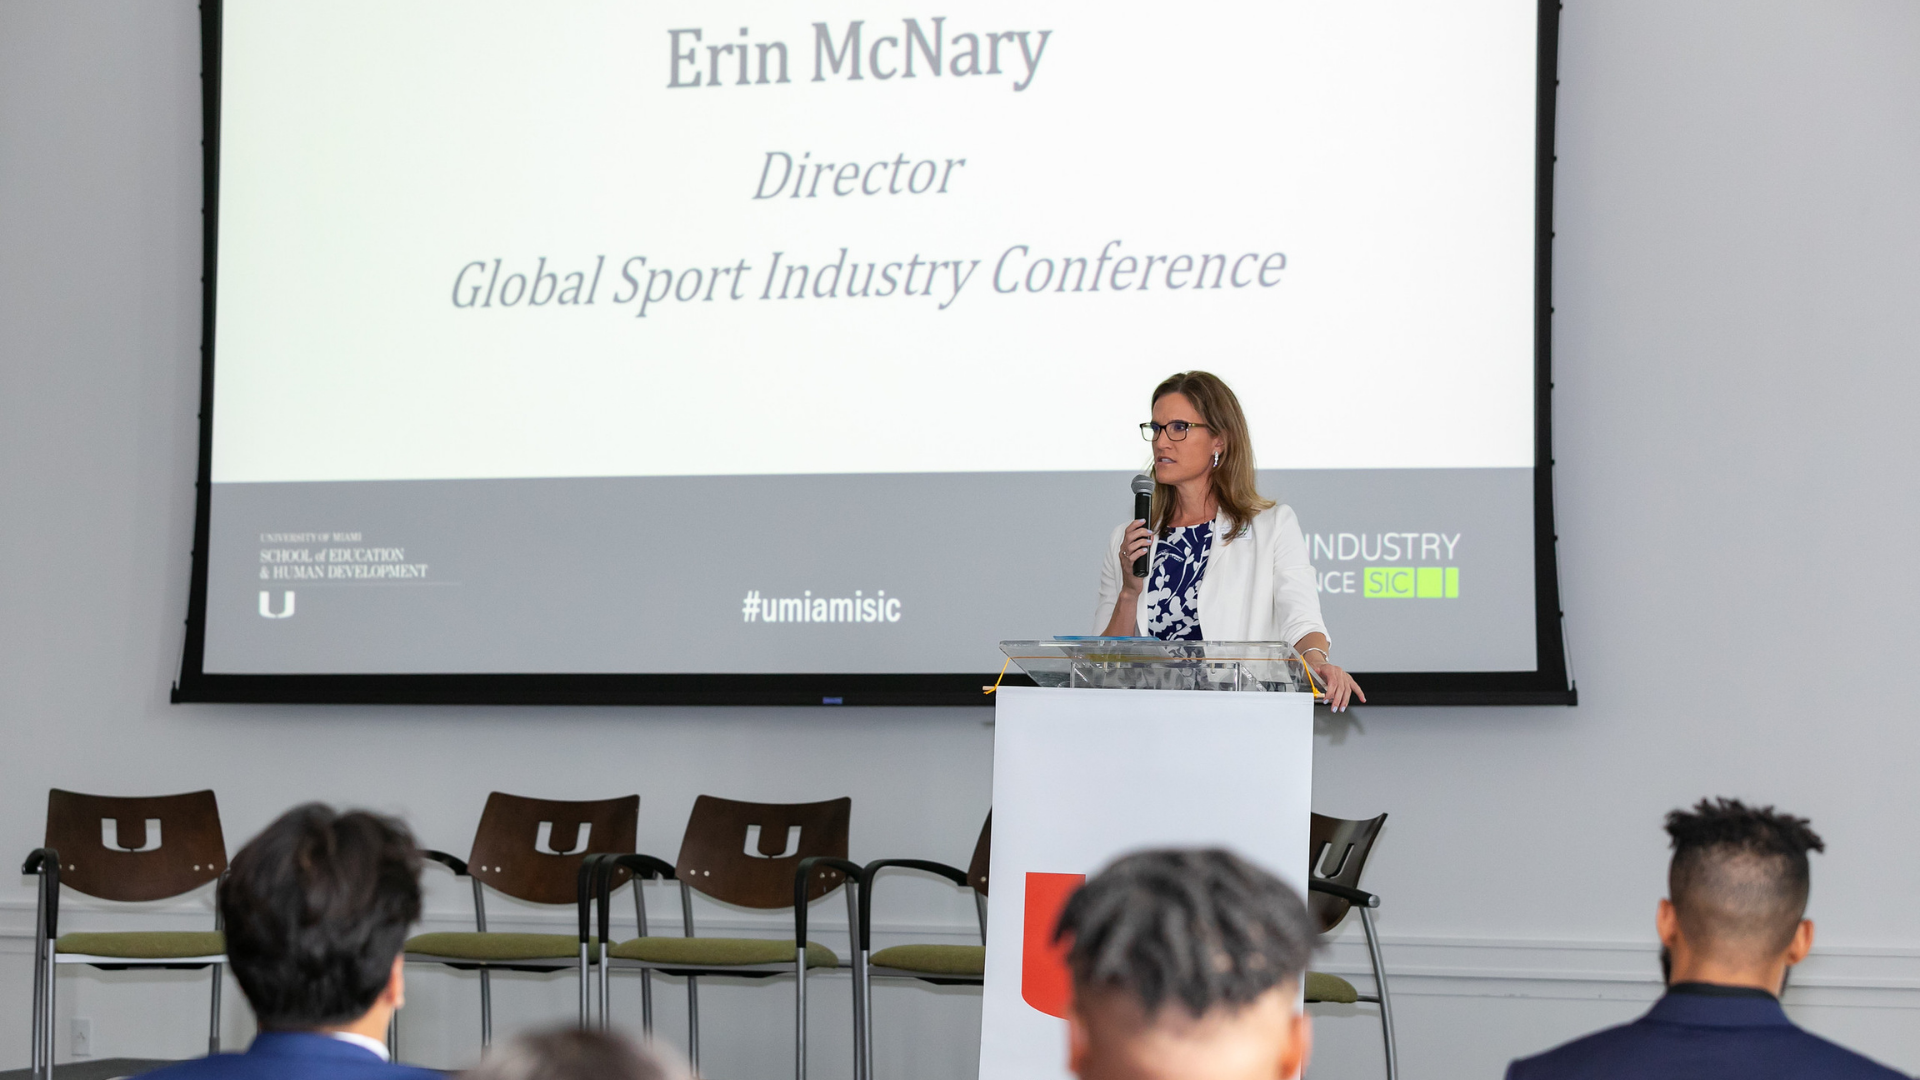 Conference Director Erin McNary addresses the crowd of attendees at the Global Sport Industry Conference in the Donna E. Shalala Student Center on campus.